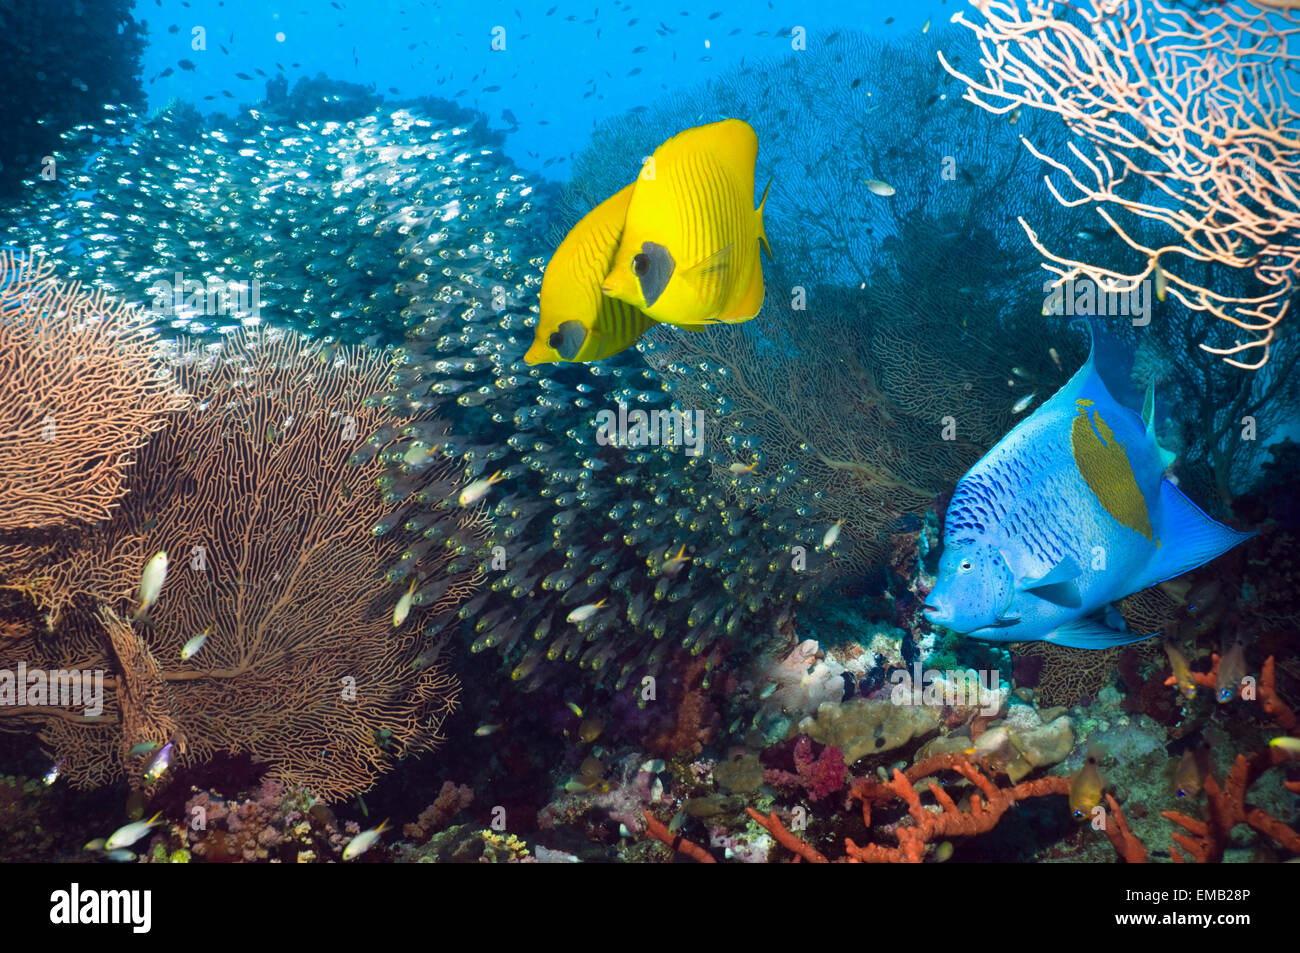 Coral reef scenery with a pair of Golden butterflyfish a Yellowbar or Arbian angelfish and Pygmy sweepers. Stock Photo